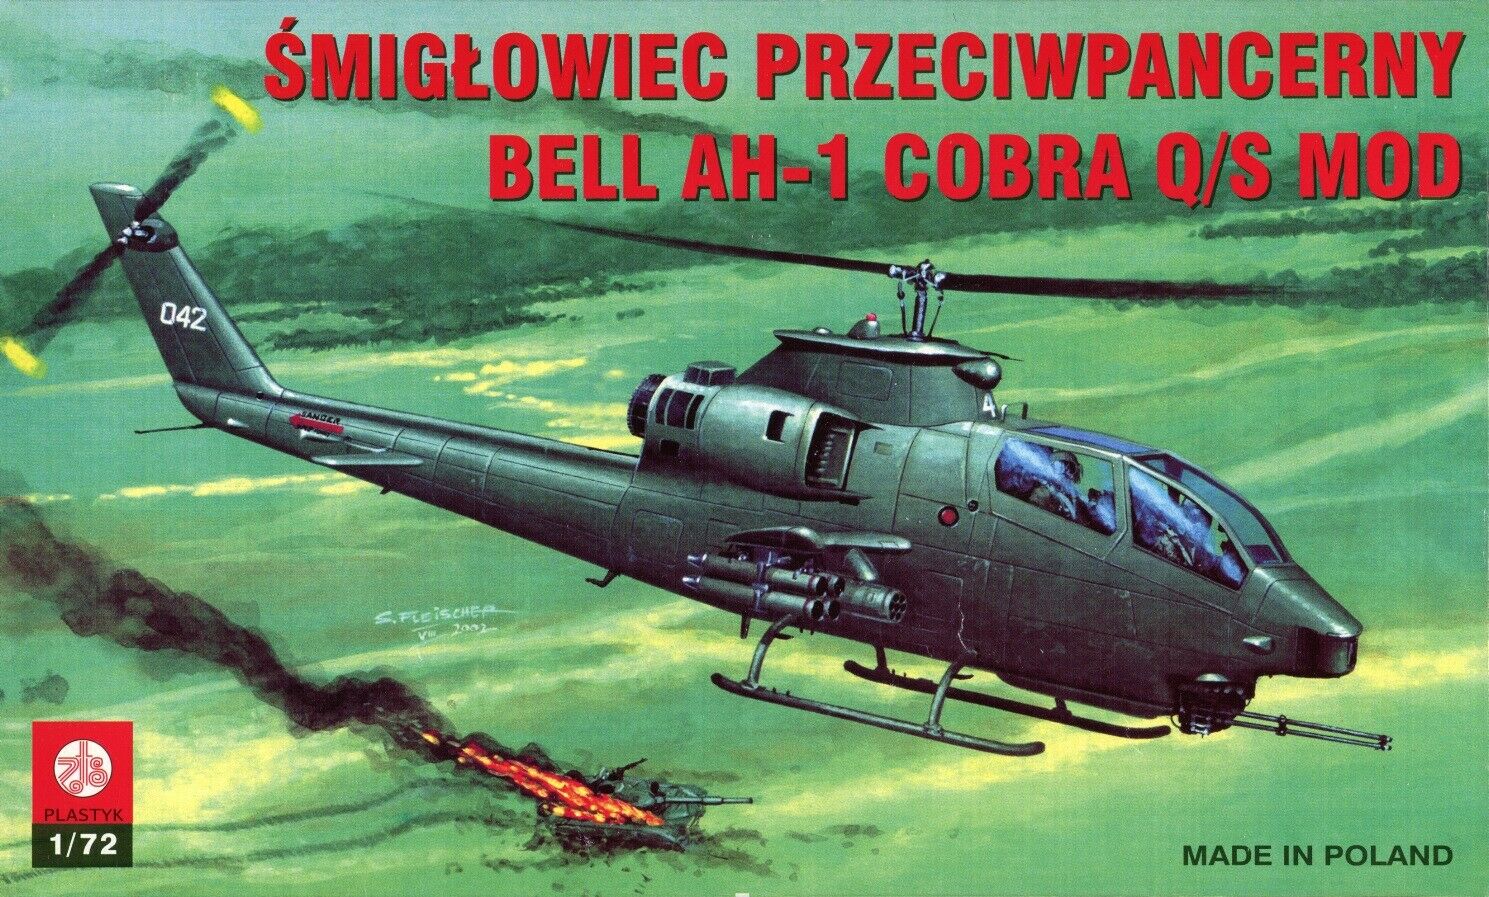 Helicopter Bell Ah-1 Cobra Q/s Mod  # Scale 1/72 #  Zts Plastyk # S-022